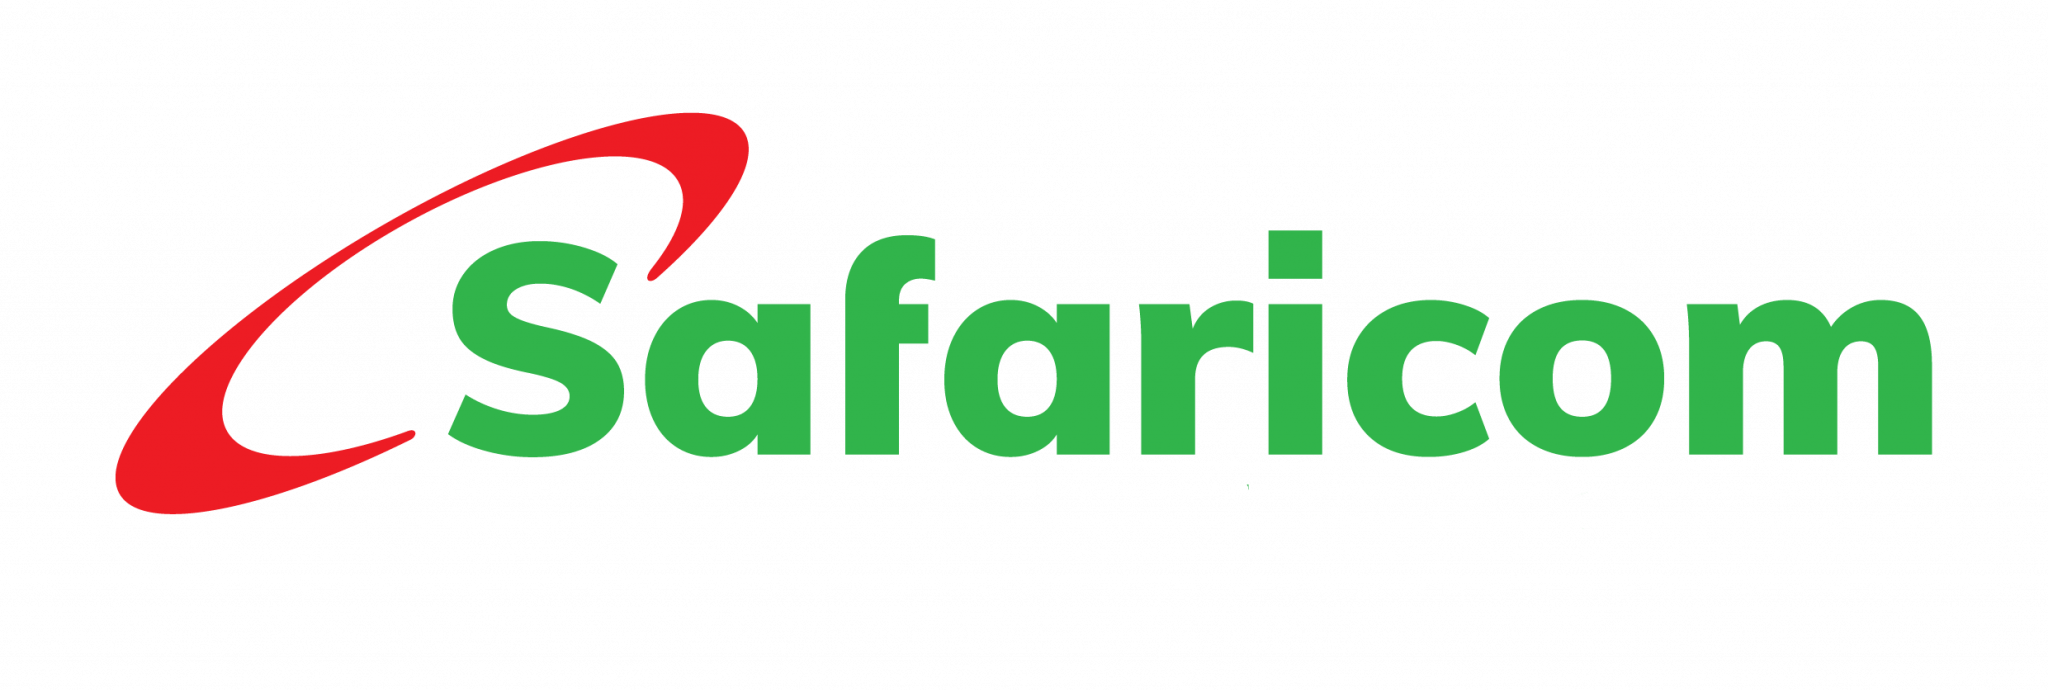 Mobile network Safariacom has agreed a sponsorship deal with the Kenyan team ©Safaricom